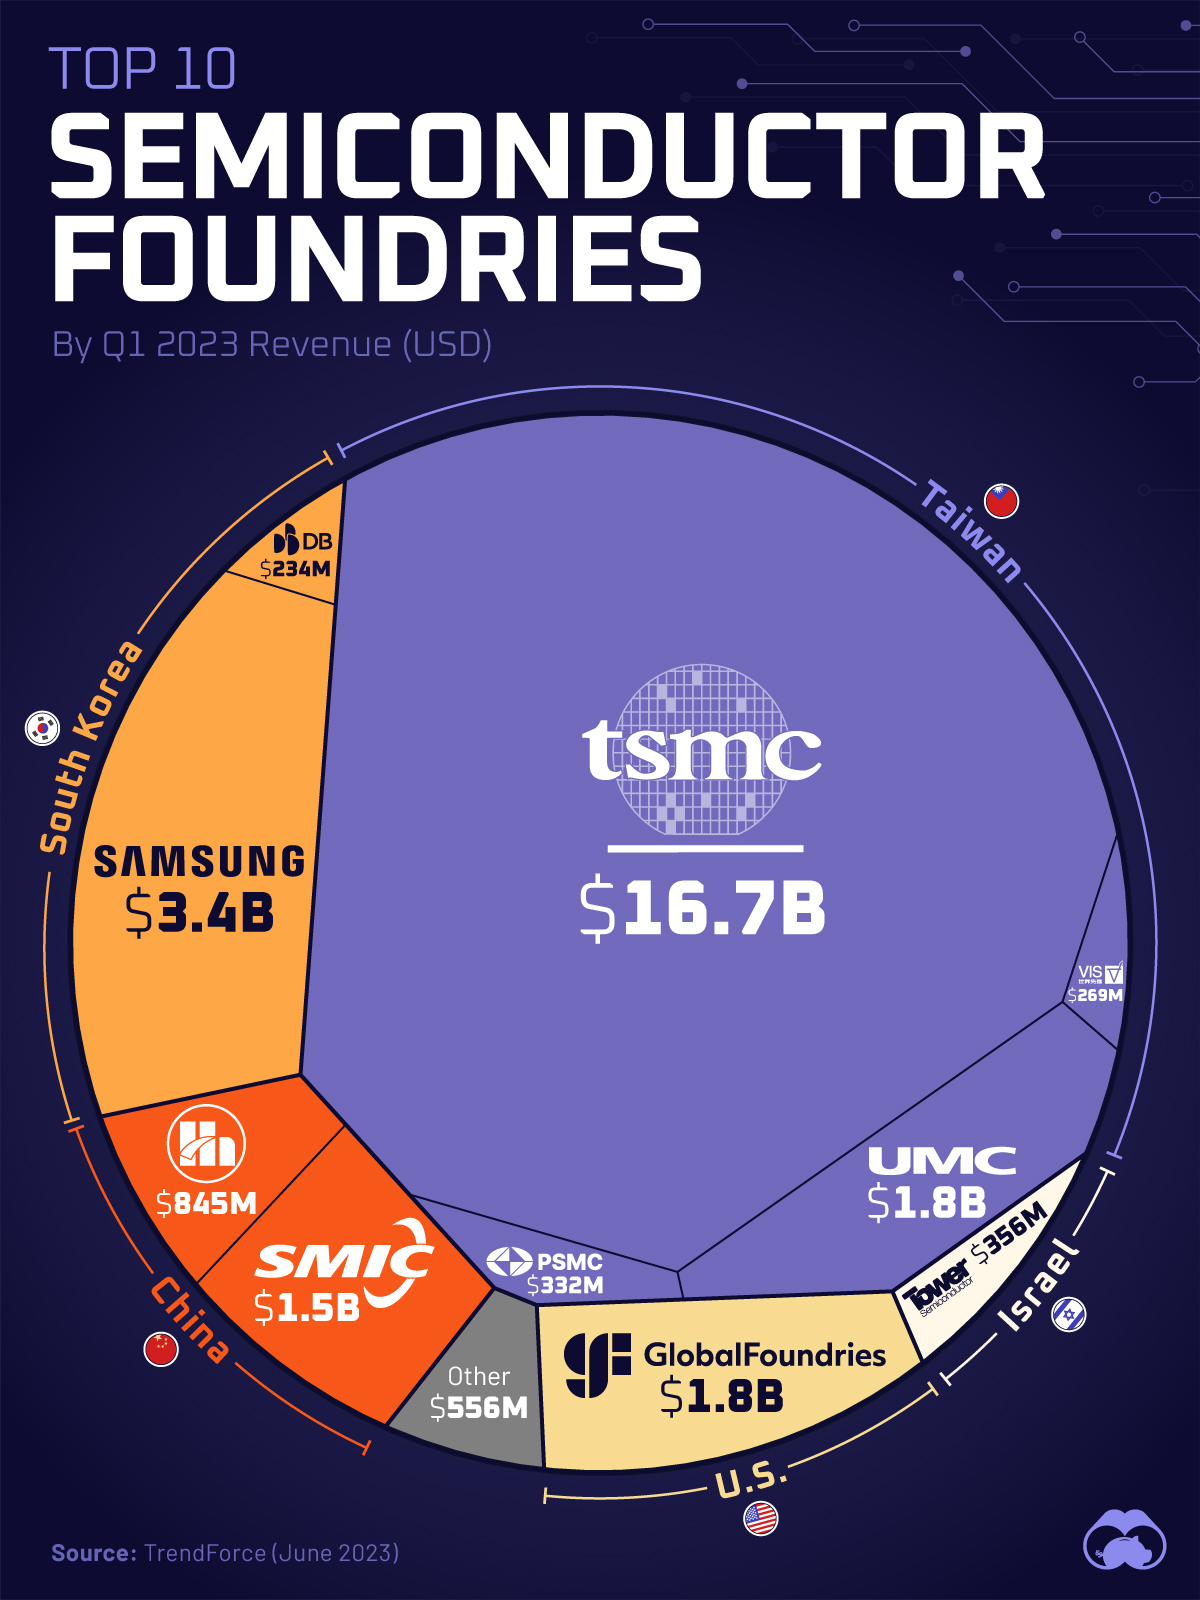 This chart shows the largest semiconductor foundry companies by their percentage of global revenues in Q1 2023.